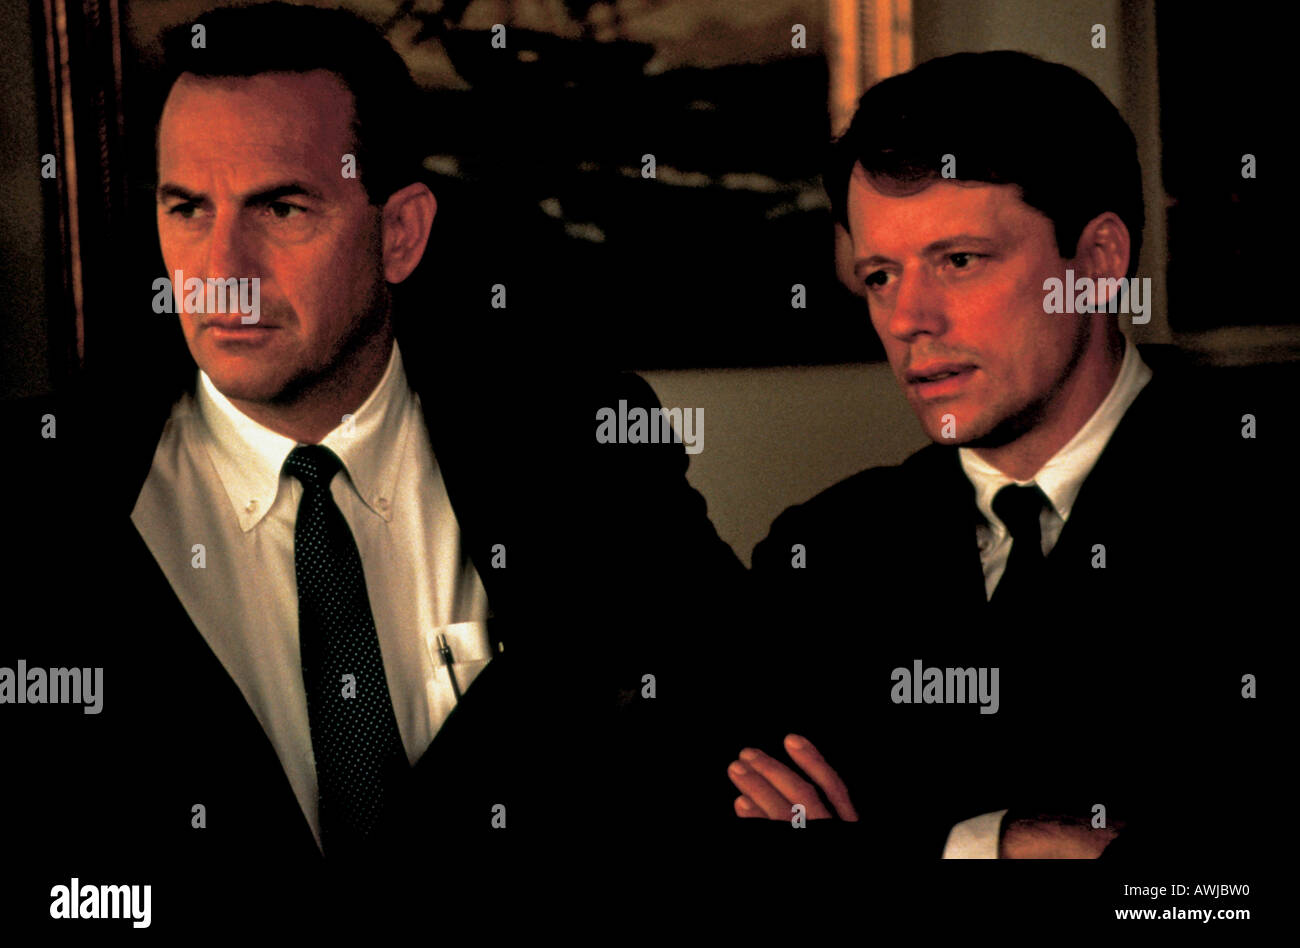 https://c8.alamy.com/comp/AWJBW0/thirteen-days-2000-new-line-film-with-bruce-greenwood-at-left-as-john-AWJBW0.jpg